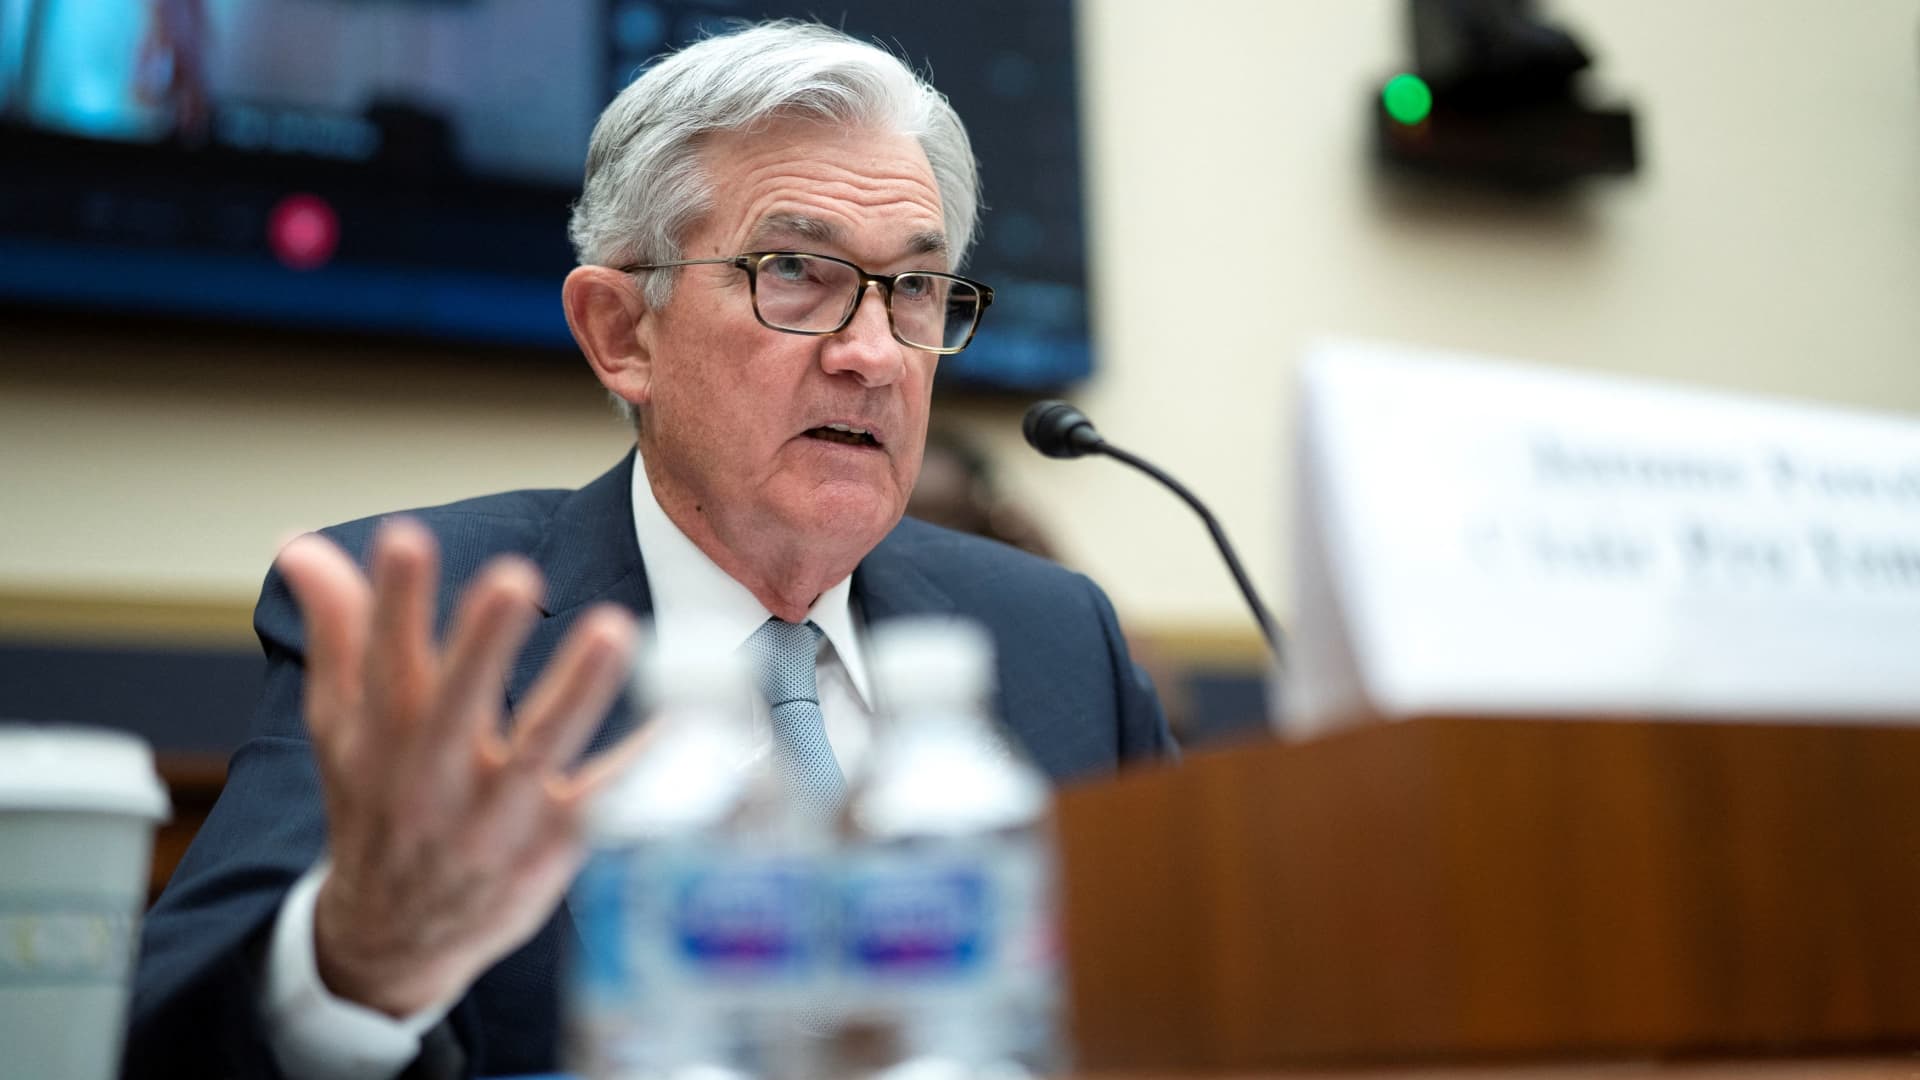 Watch Jerome Powell testify to Congress on the economy and how the Fed plans to fight inflation